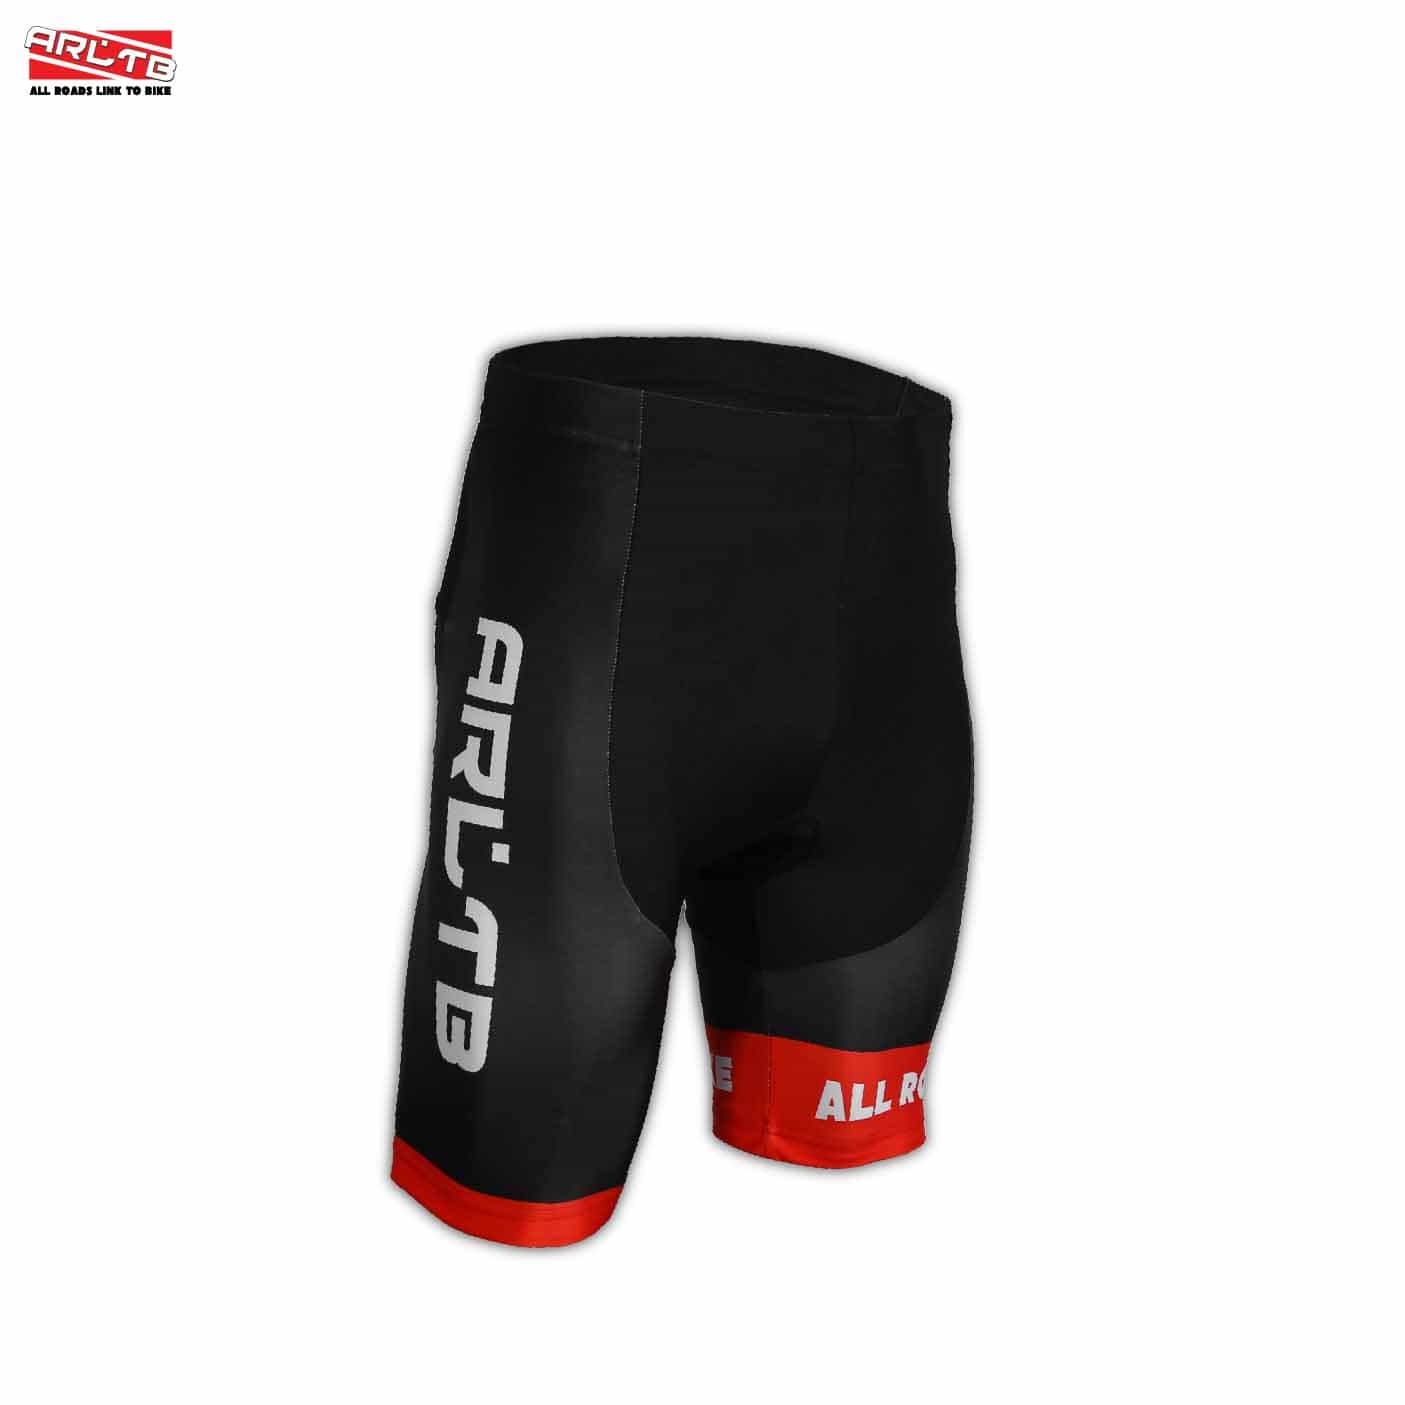 Arltb Bike Shorts 5 Sizes Men Women Gel Padded Cycling Bicycle Compression Cycle Touring Shorts Tights Underwear Pants Elastic Breathable for Mountain Bike MTB Cycle Road Bike BMX Motorcycle 02 1